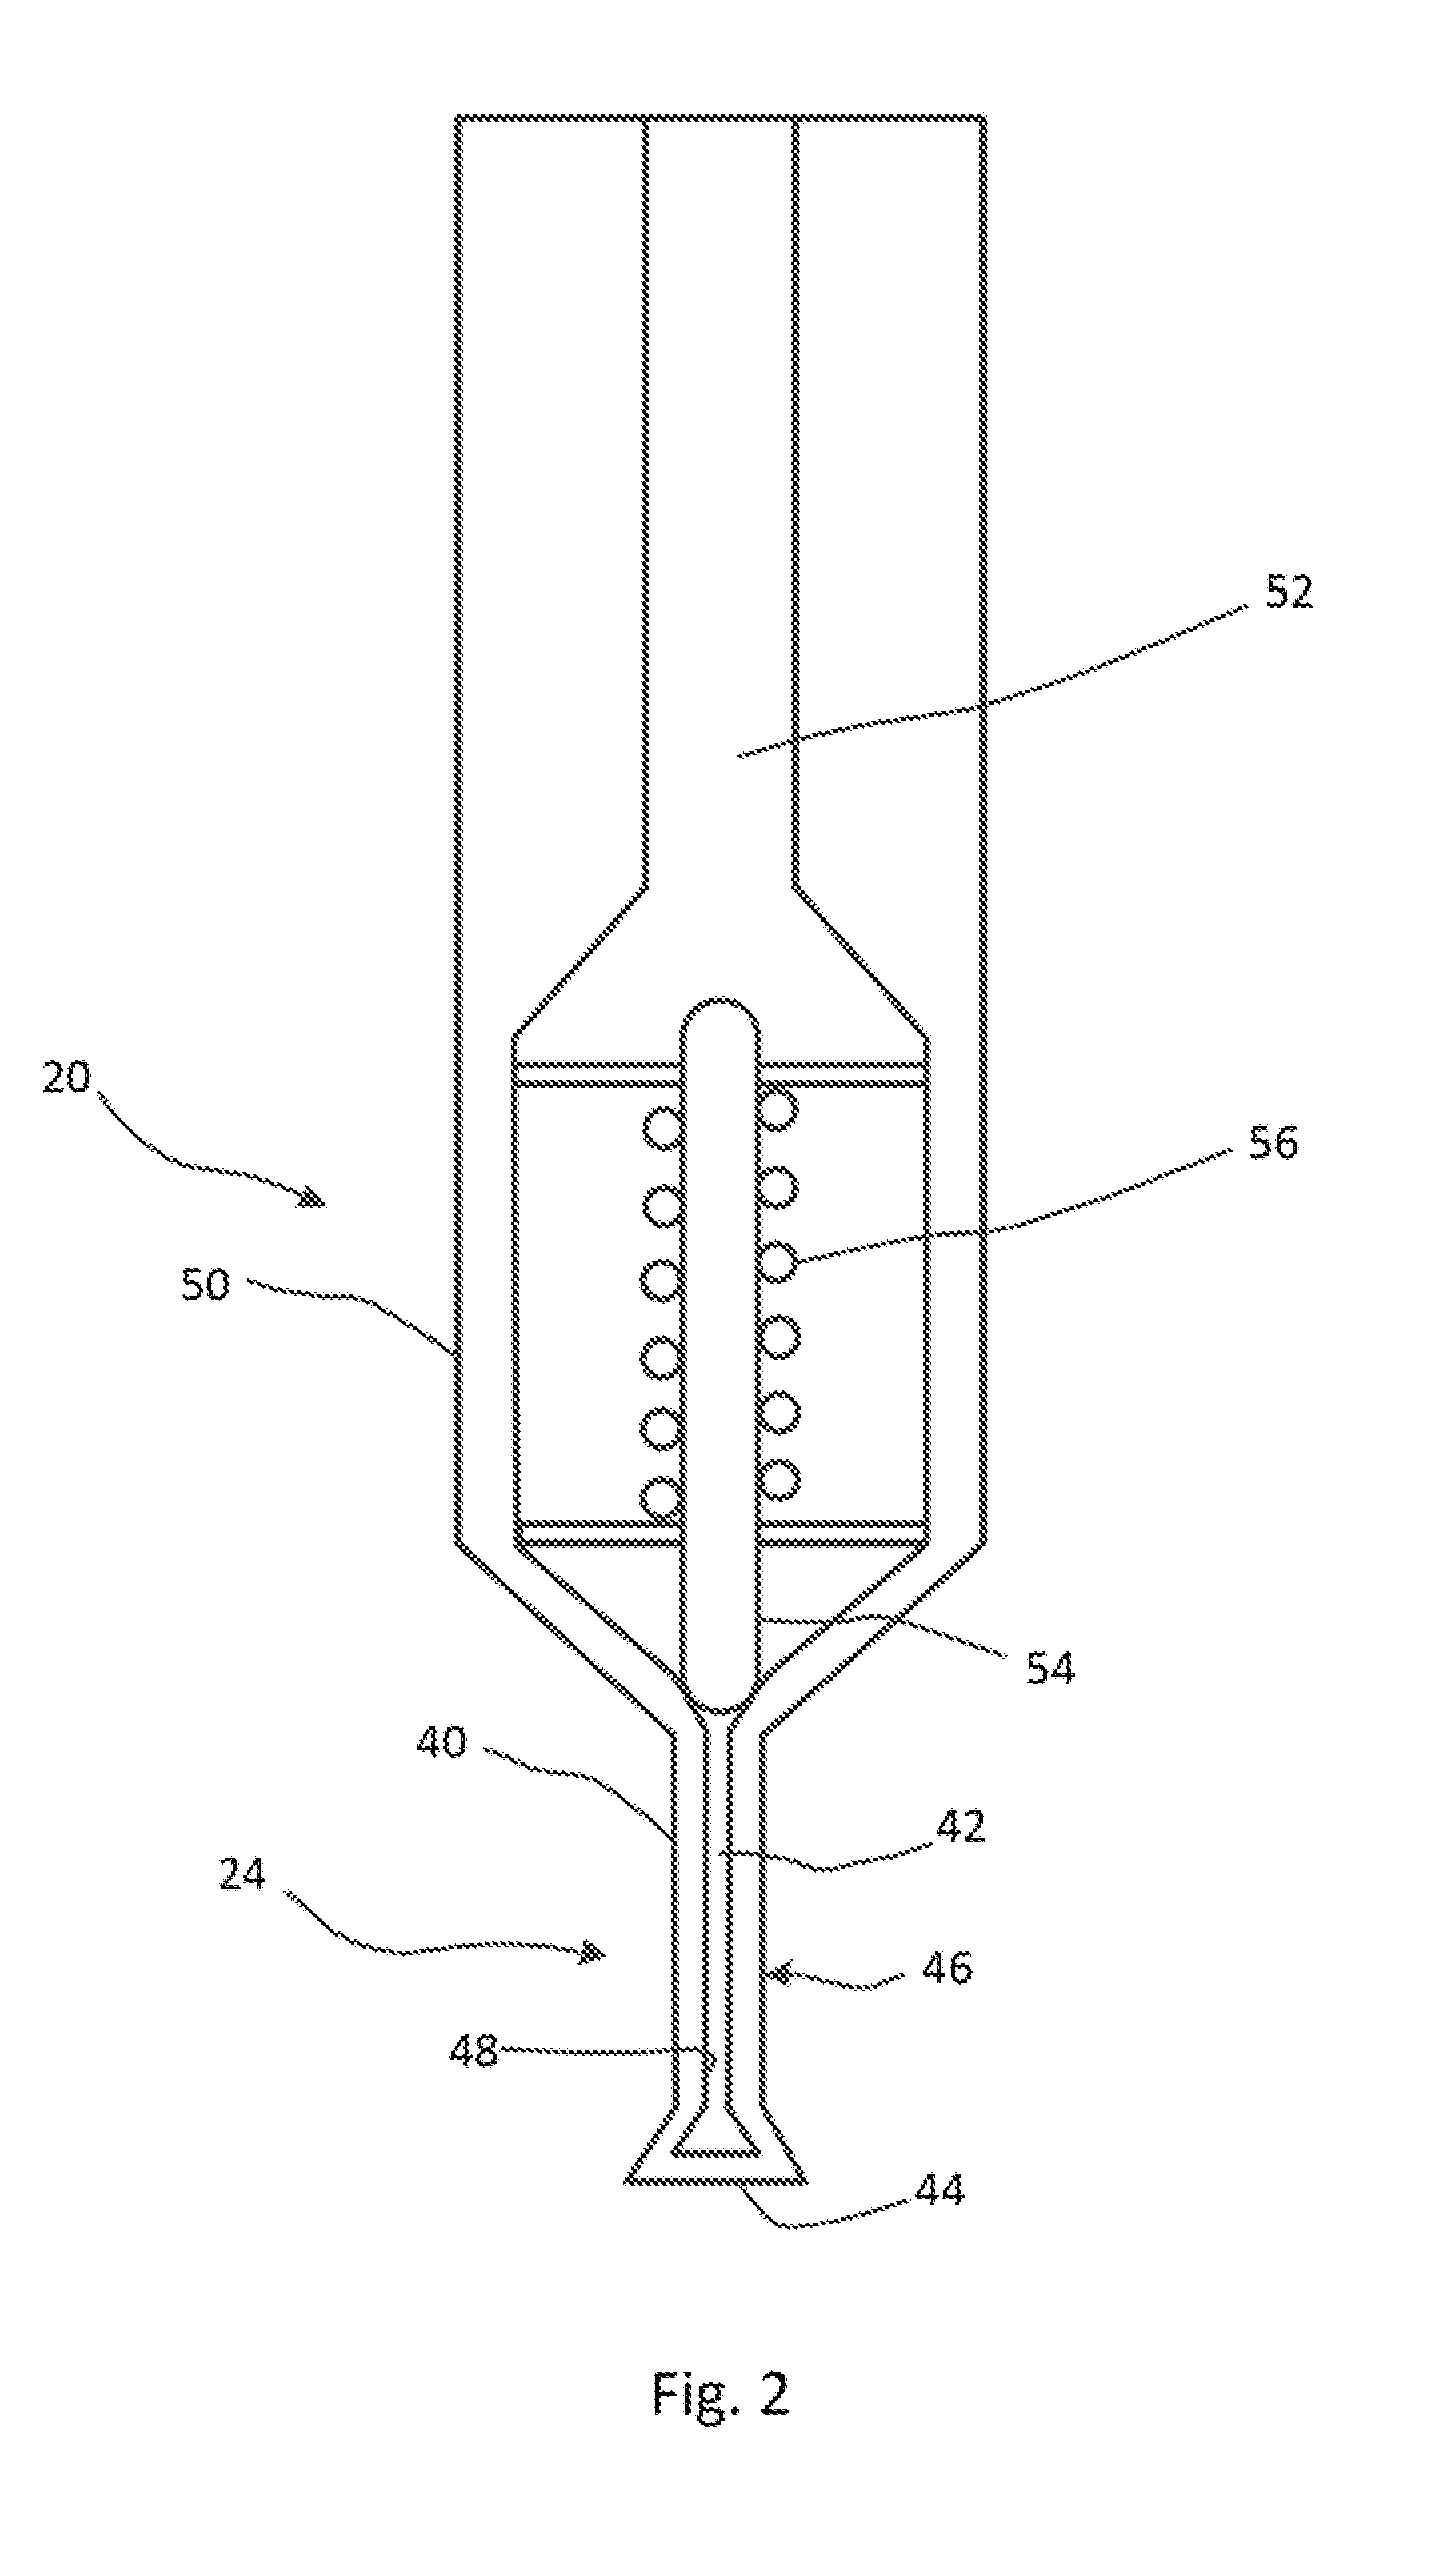 Apparatus and method of operating an injector for an exhaust gas aftertreatment apparatus